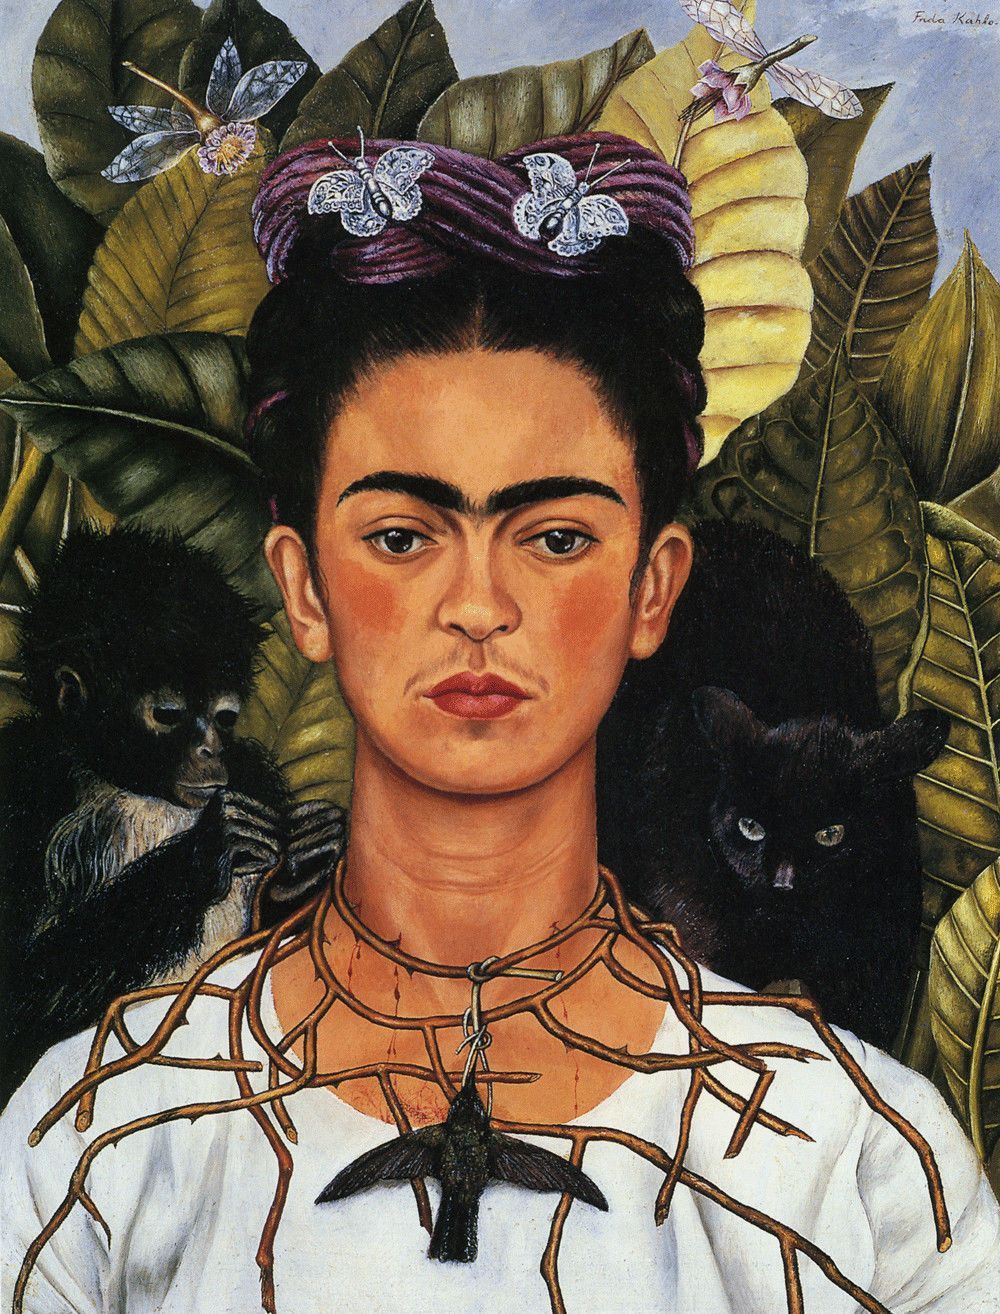 The original Self Portrait with Thorn Necklace and Hummingbird by Frida Kahlo